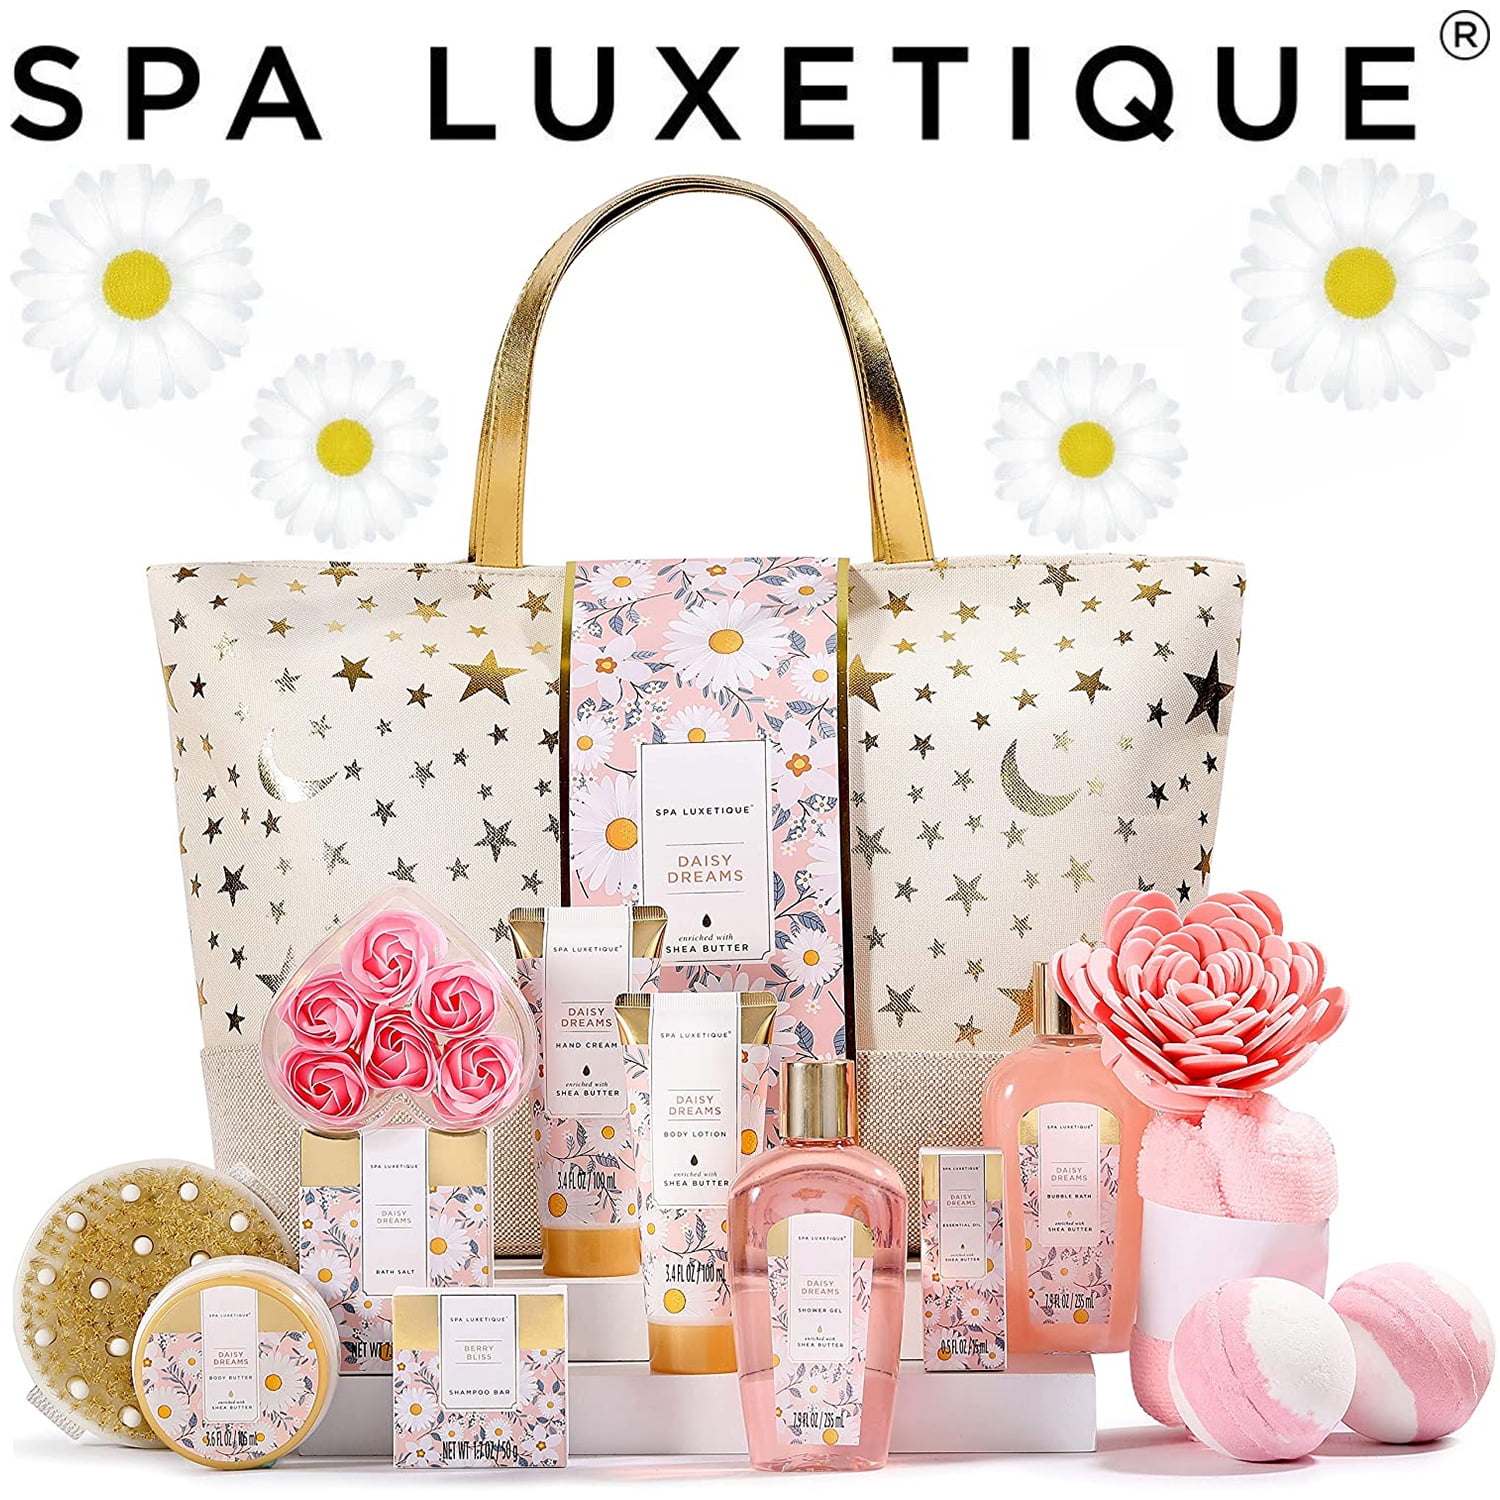  Spa Luxetique Spa Gift Basket, Home Spa Gift Basket for Women  - 15pcs Lavender Gift Baskets Includes Bubble Bath, Bath Bombs, Spa Kit for  Women Gift Set, Birthday Christmas Gift